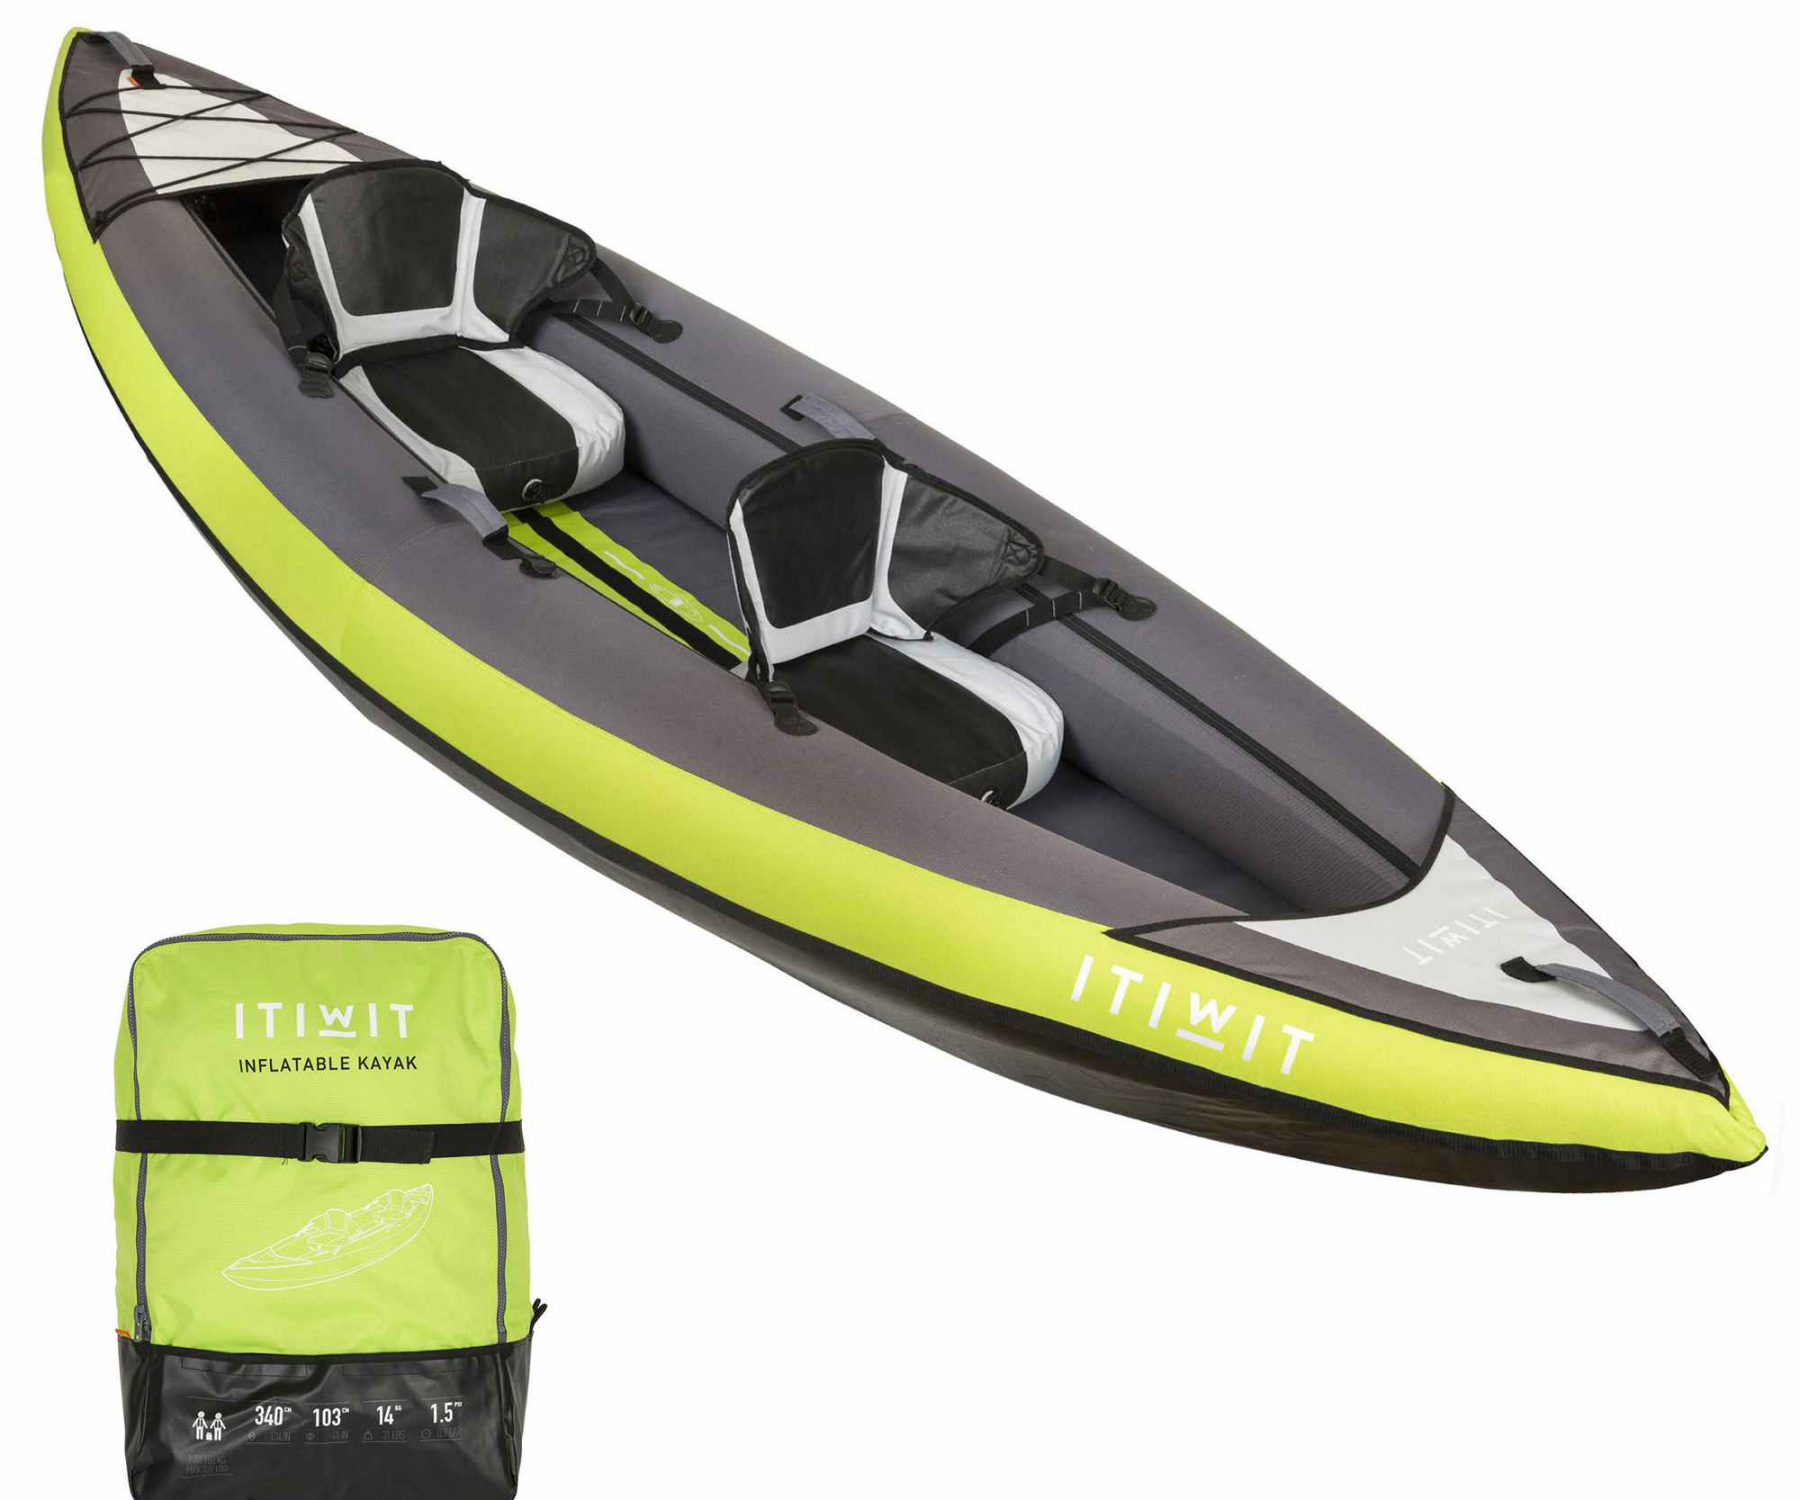 kayak_gonflable_itwit_2_verde